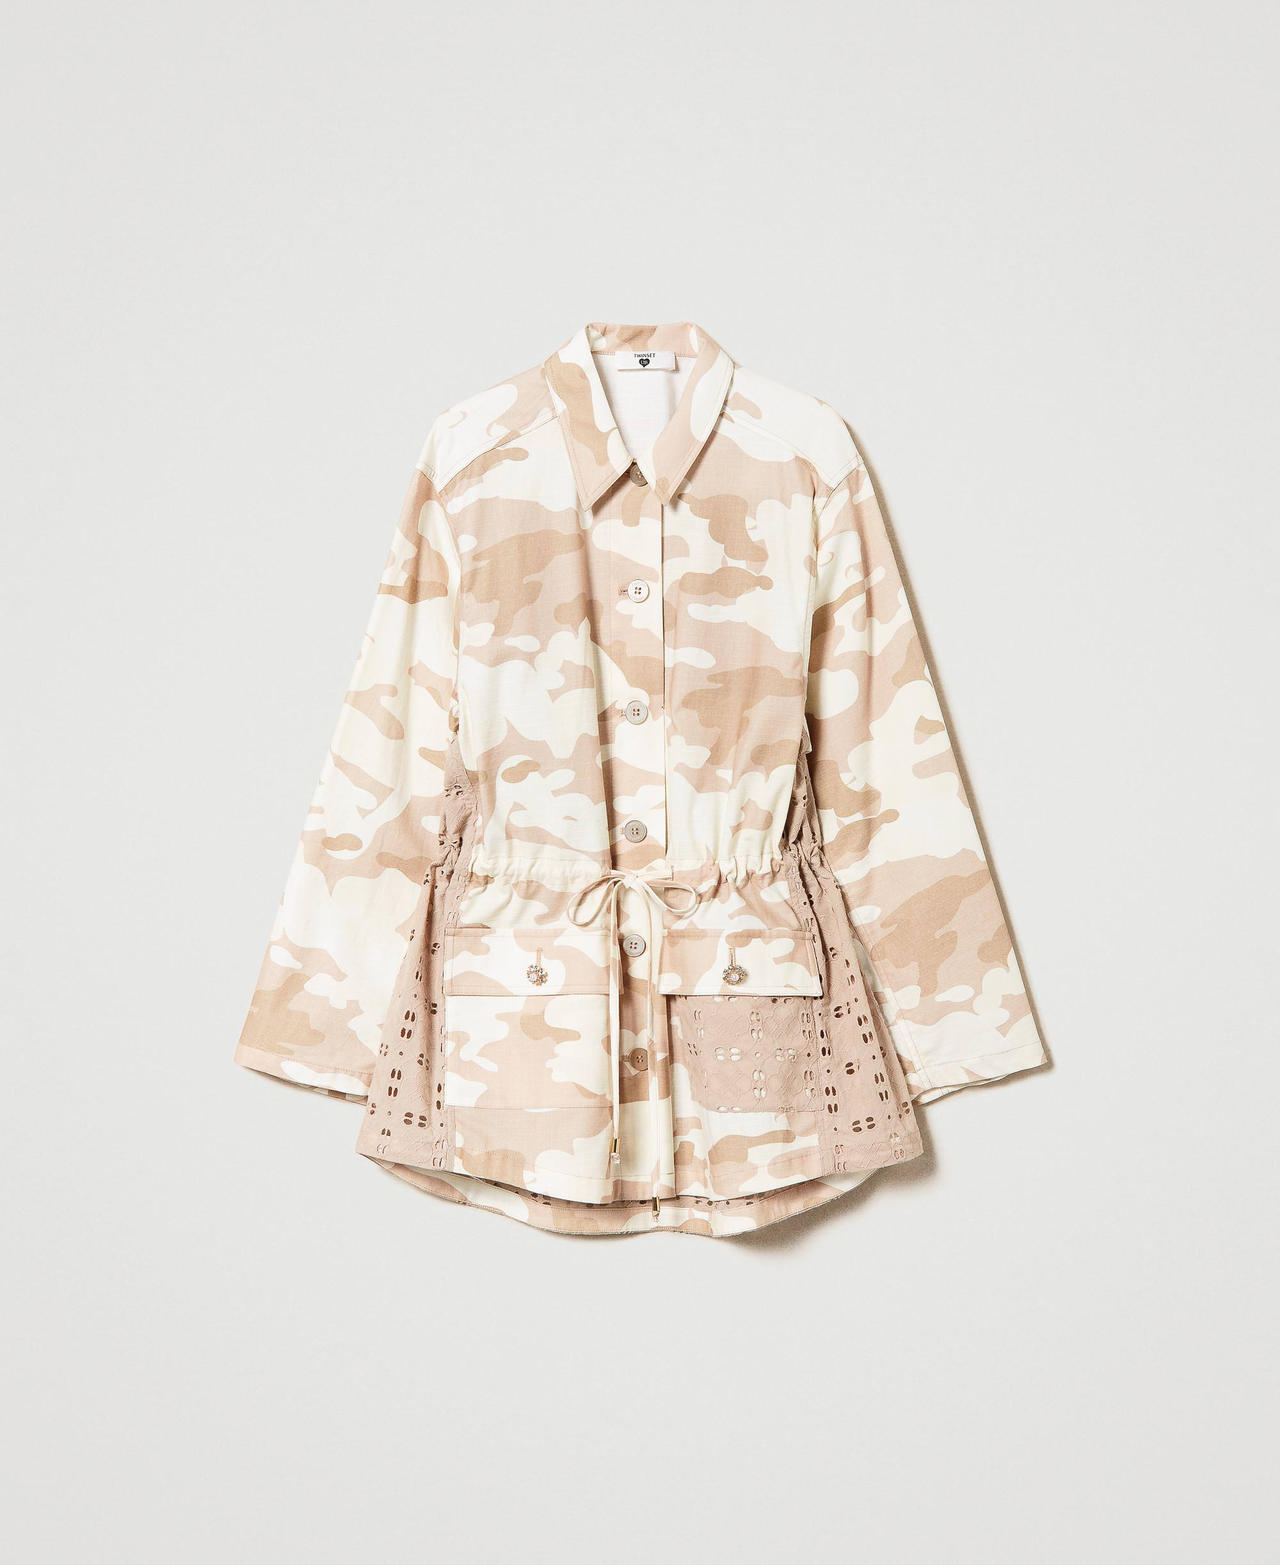 Giacca sahariana a stampa camouflage Stampa Camouflage Beige "Champagne" Donna 241LL2NAA-0S